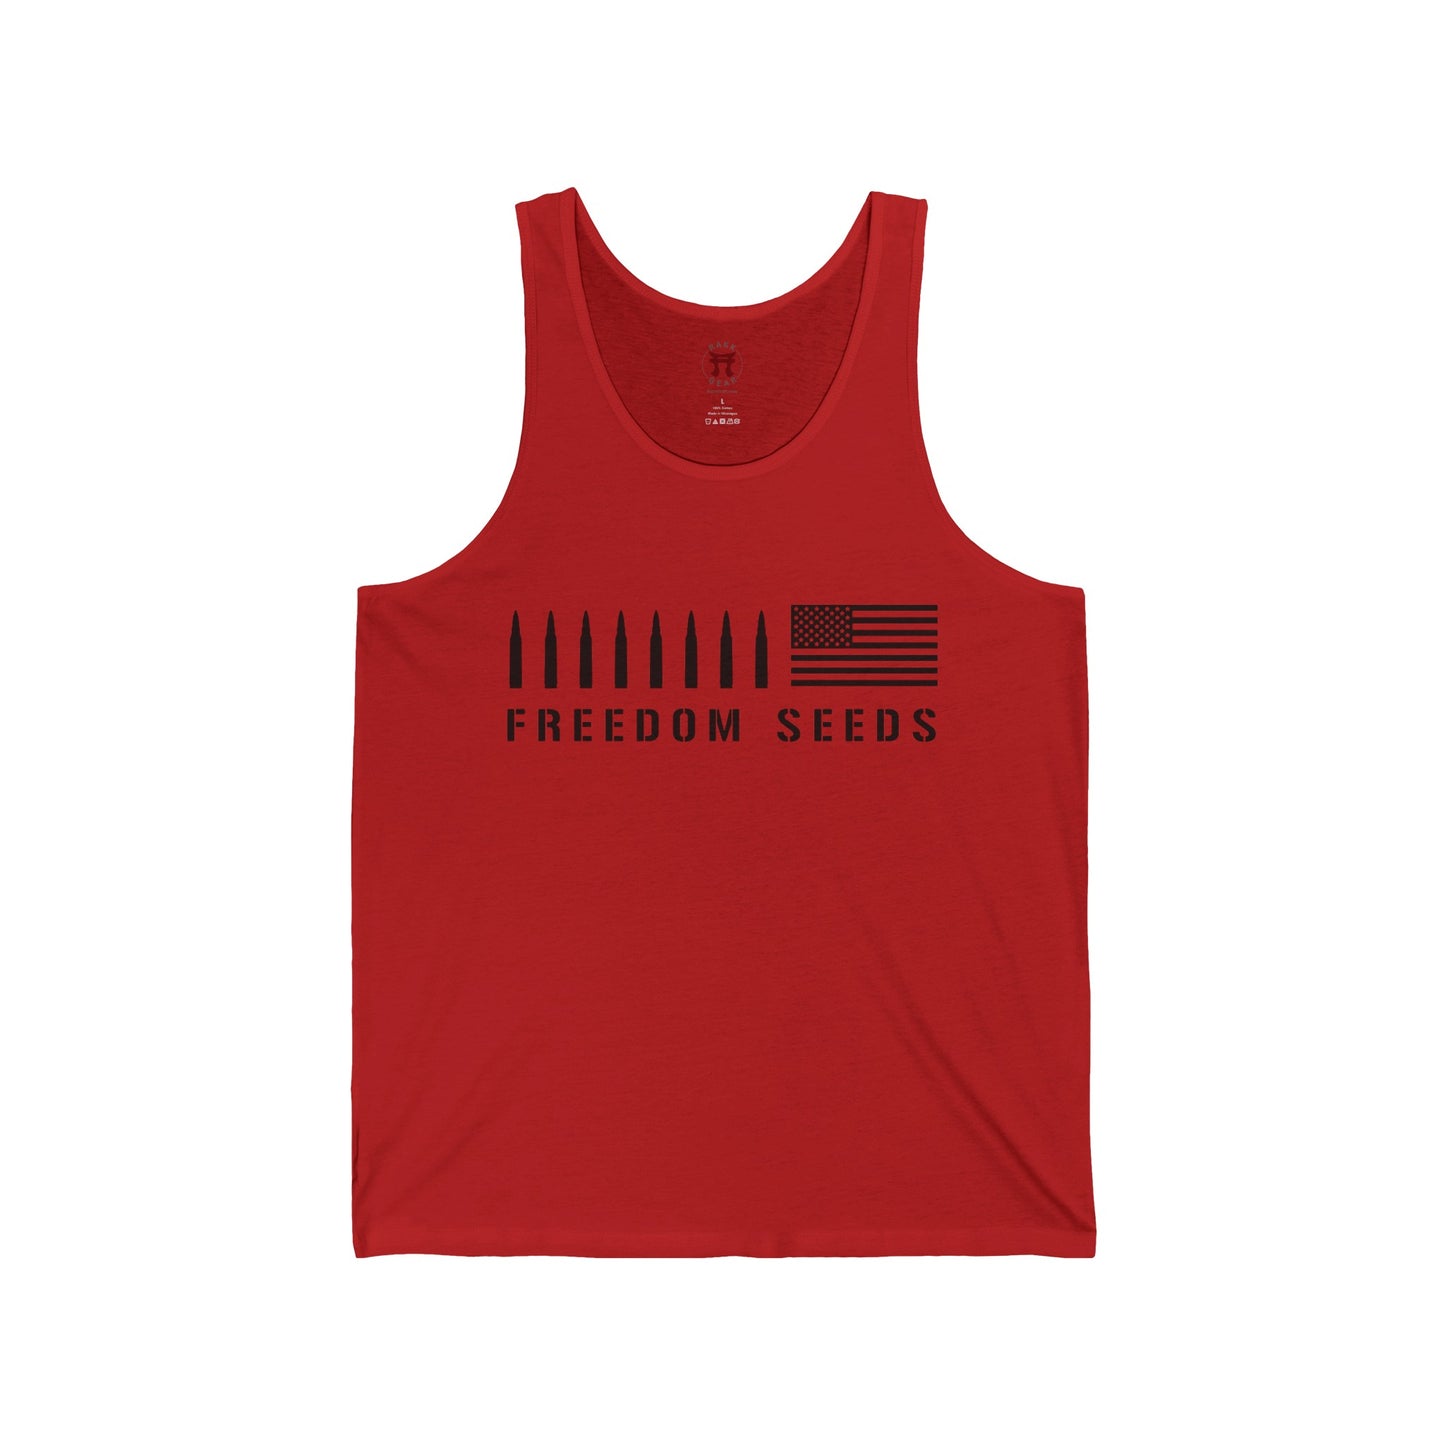 Rakkgear Freedom Seeds Tank Top in red with black lettering